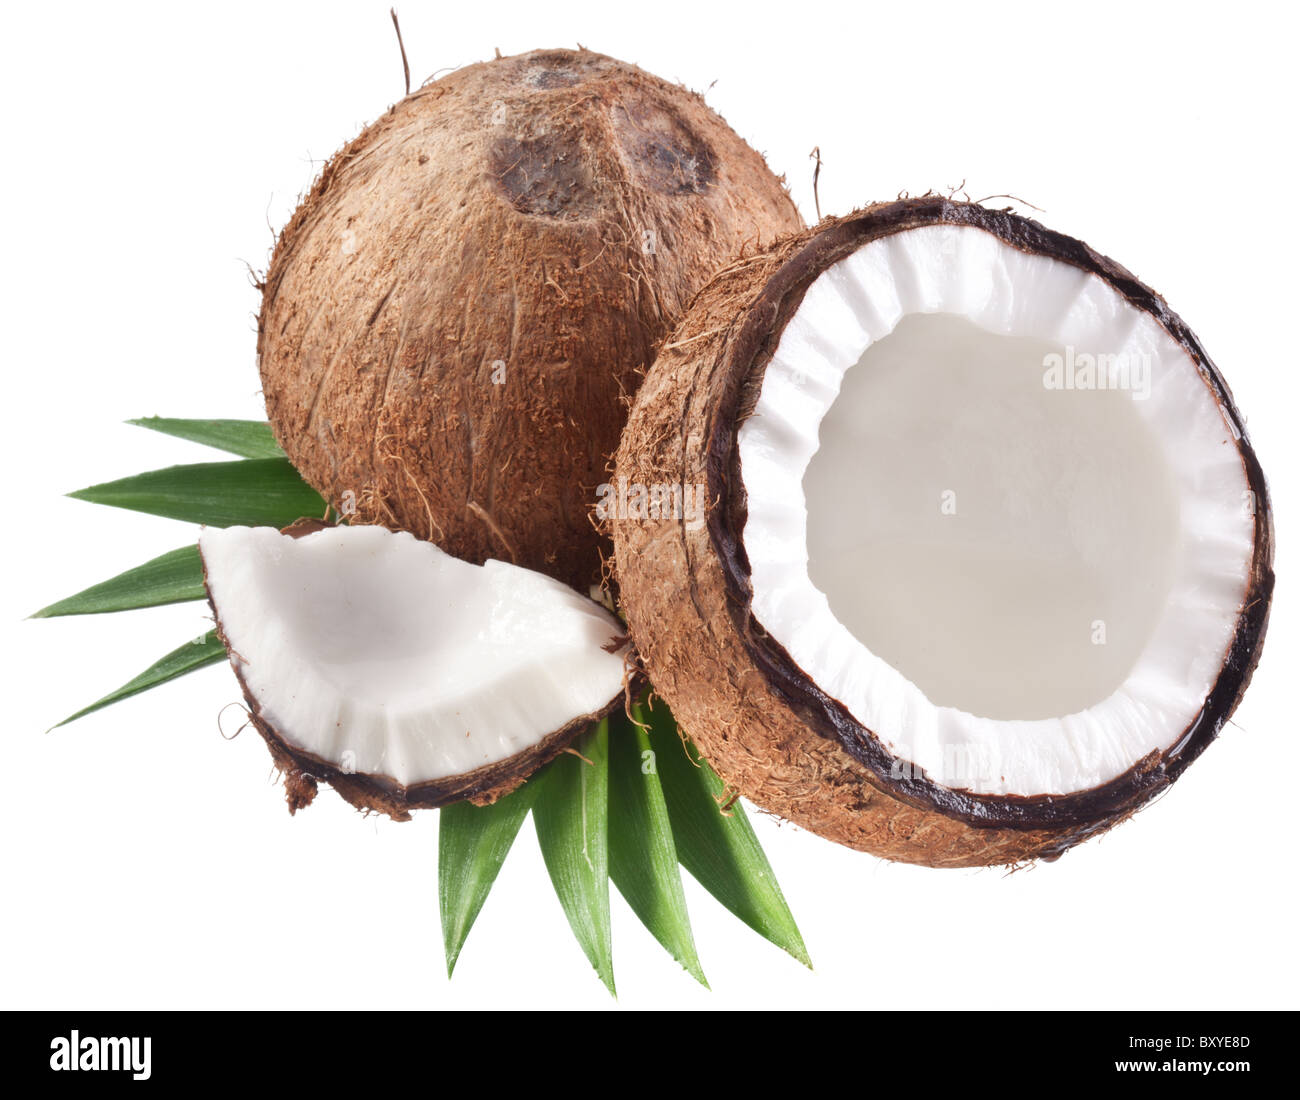 High-quality photos of coconuts on a white background. Stock Photo